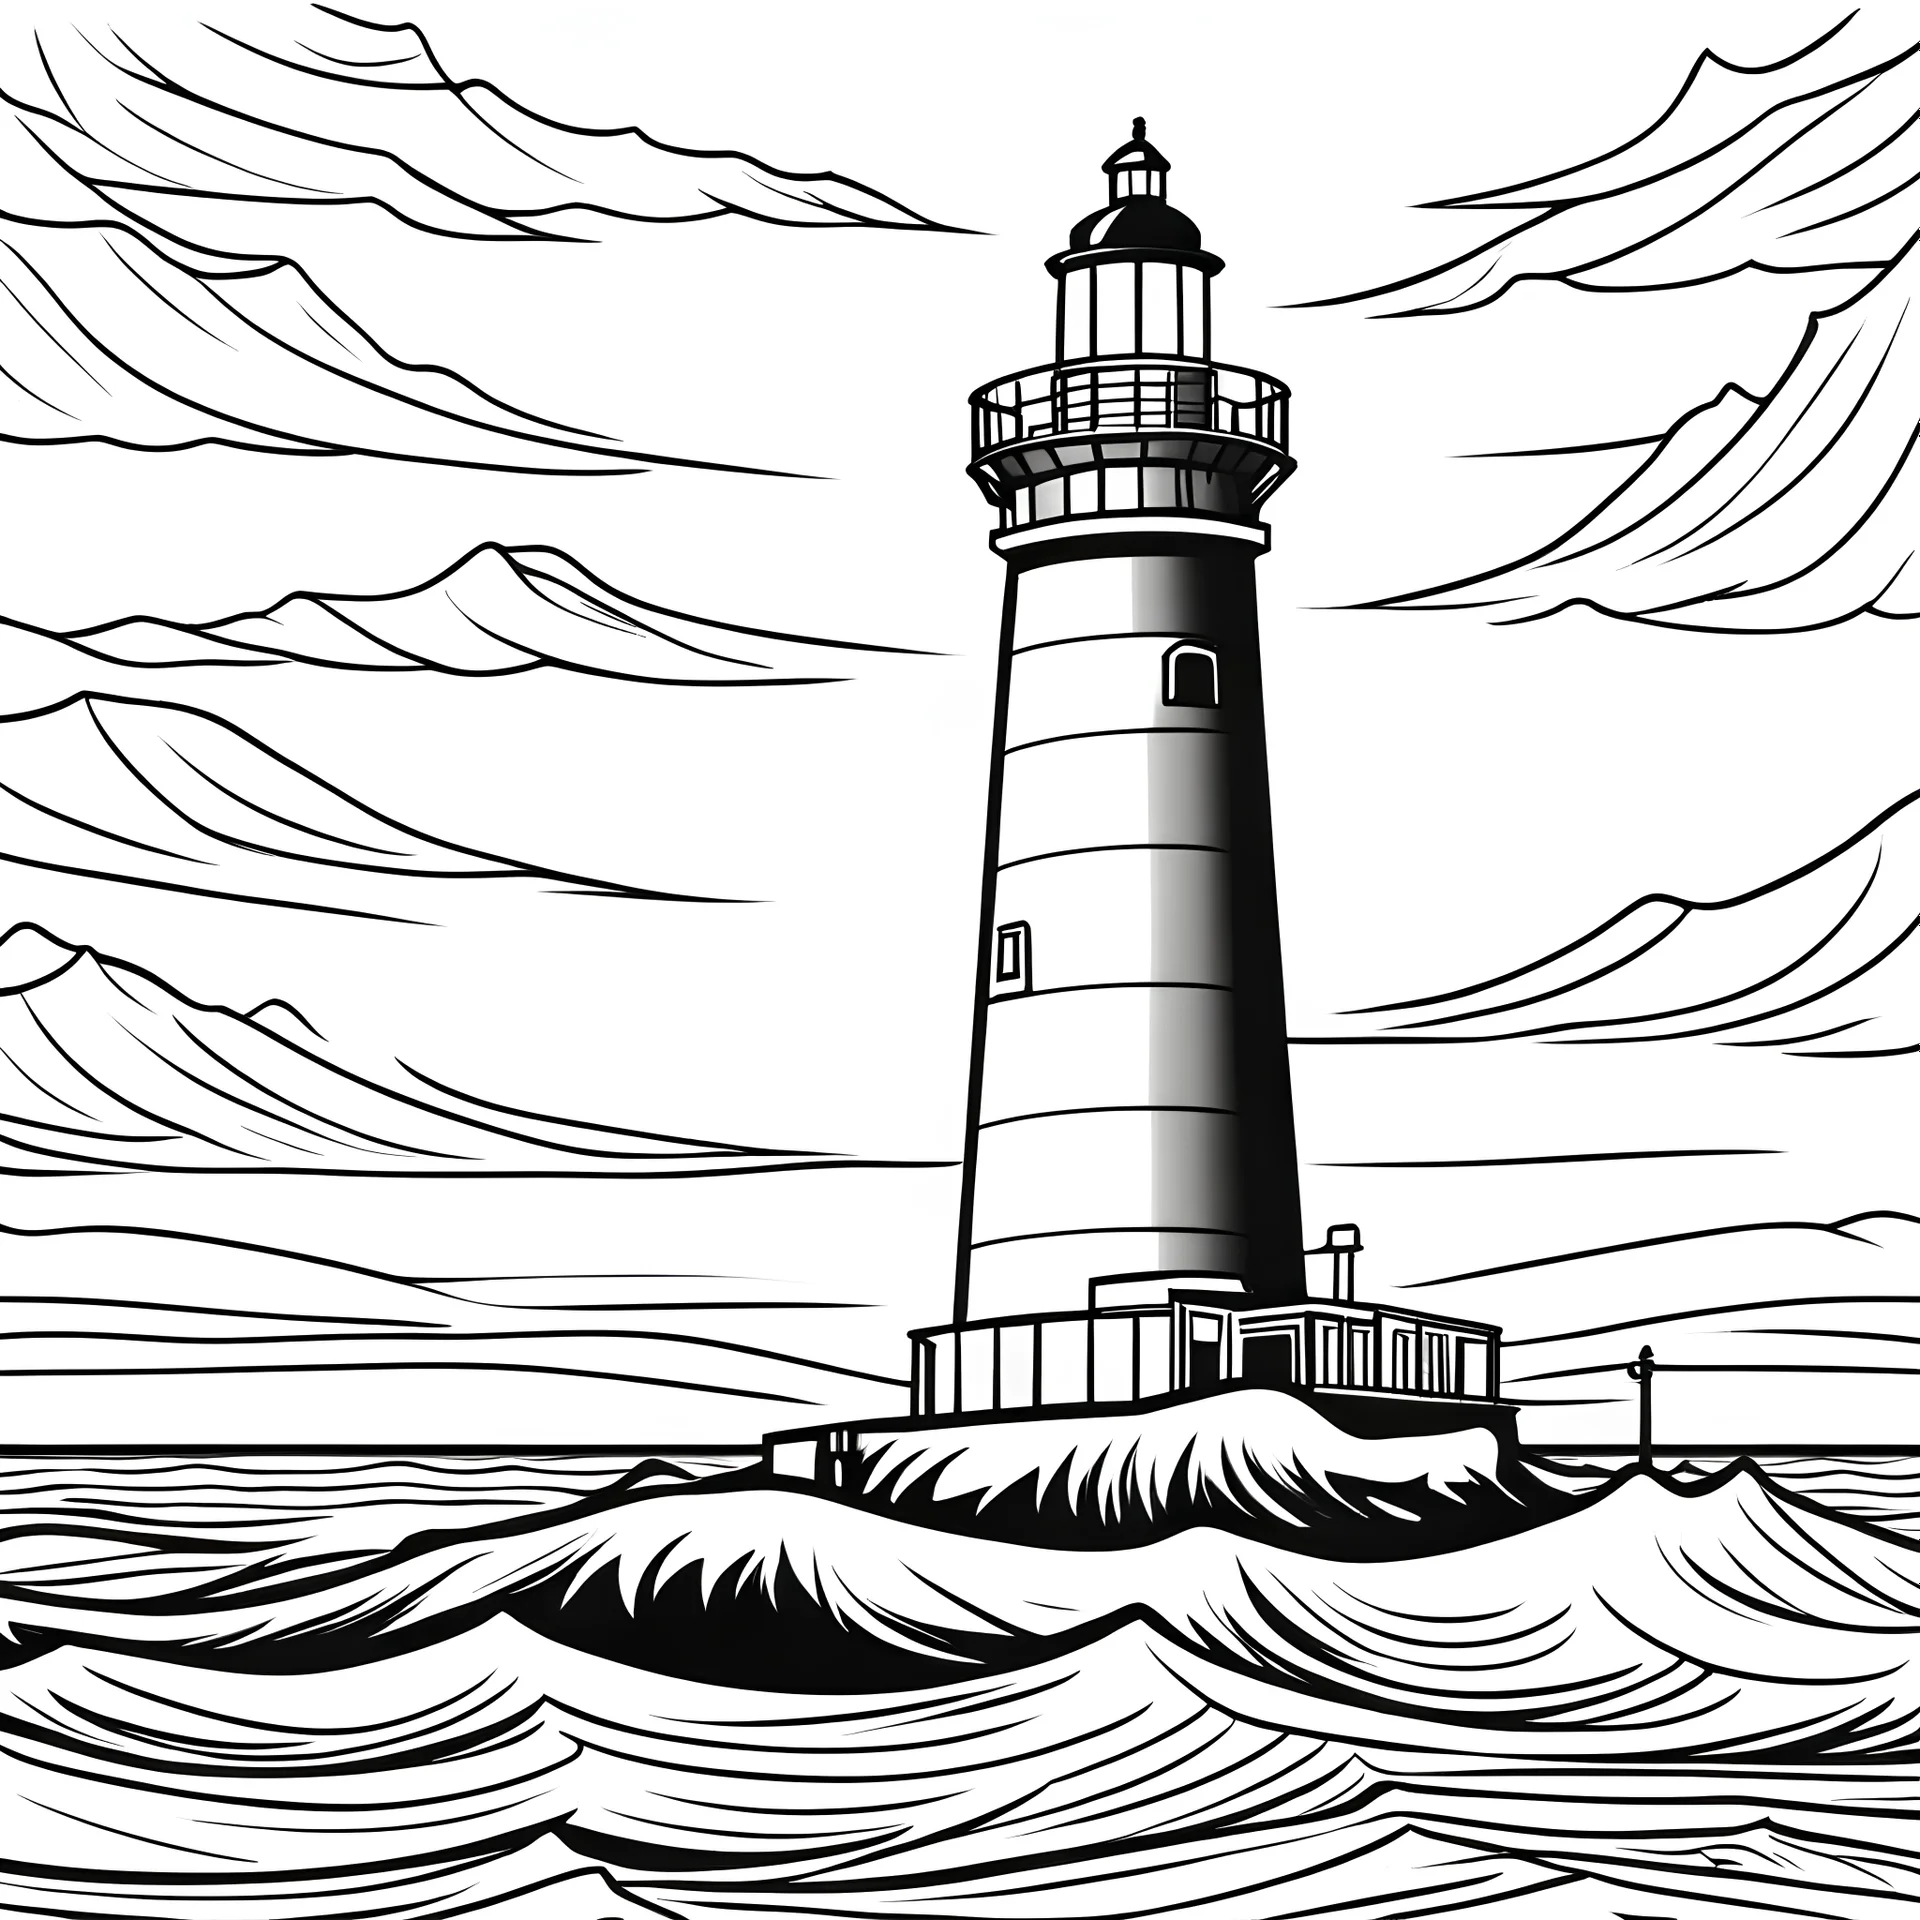 Portland Head Lighthouse | Color pencil drawing, Painting, Pencil drawings